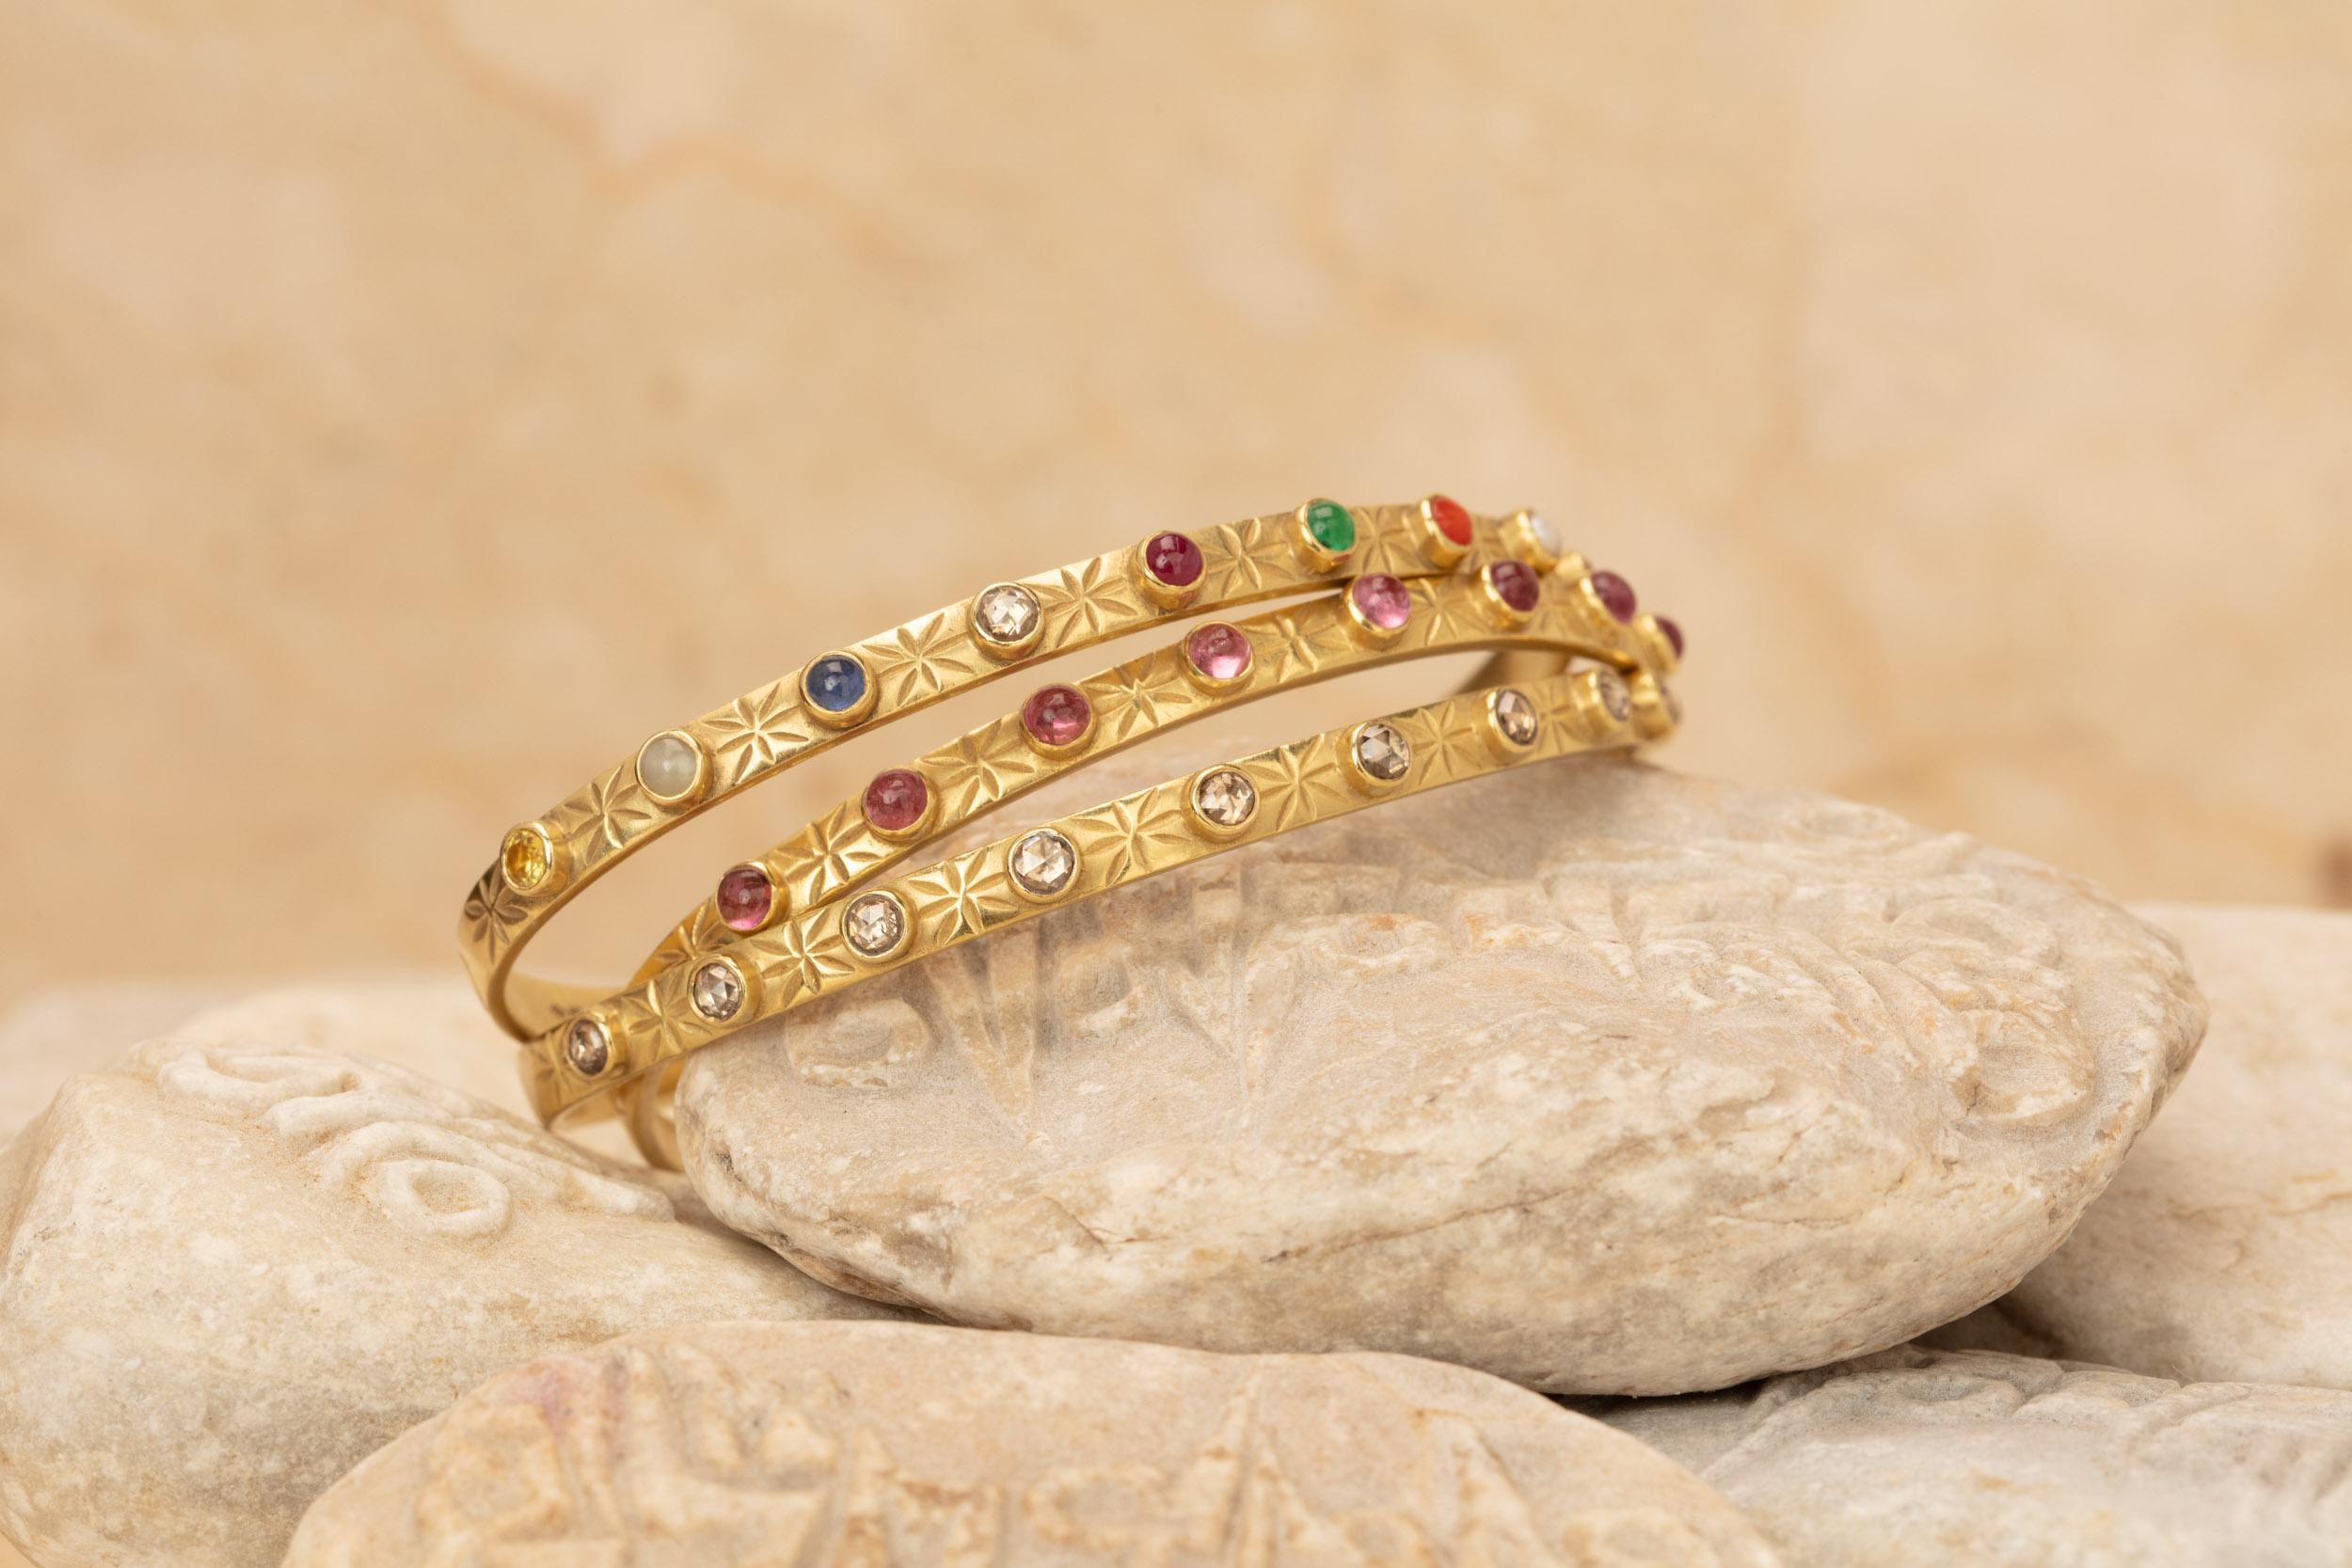 Women's 18 Karat Gold Cuff with 9 Cabochon Gems and Engraving of Star and Moons For Sale